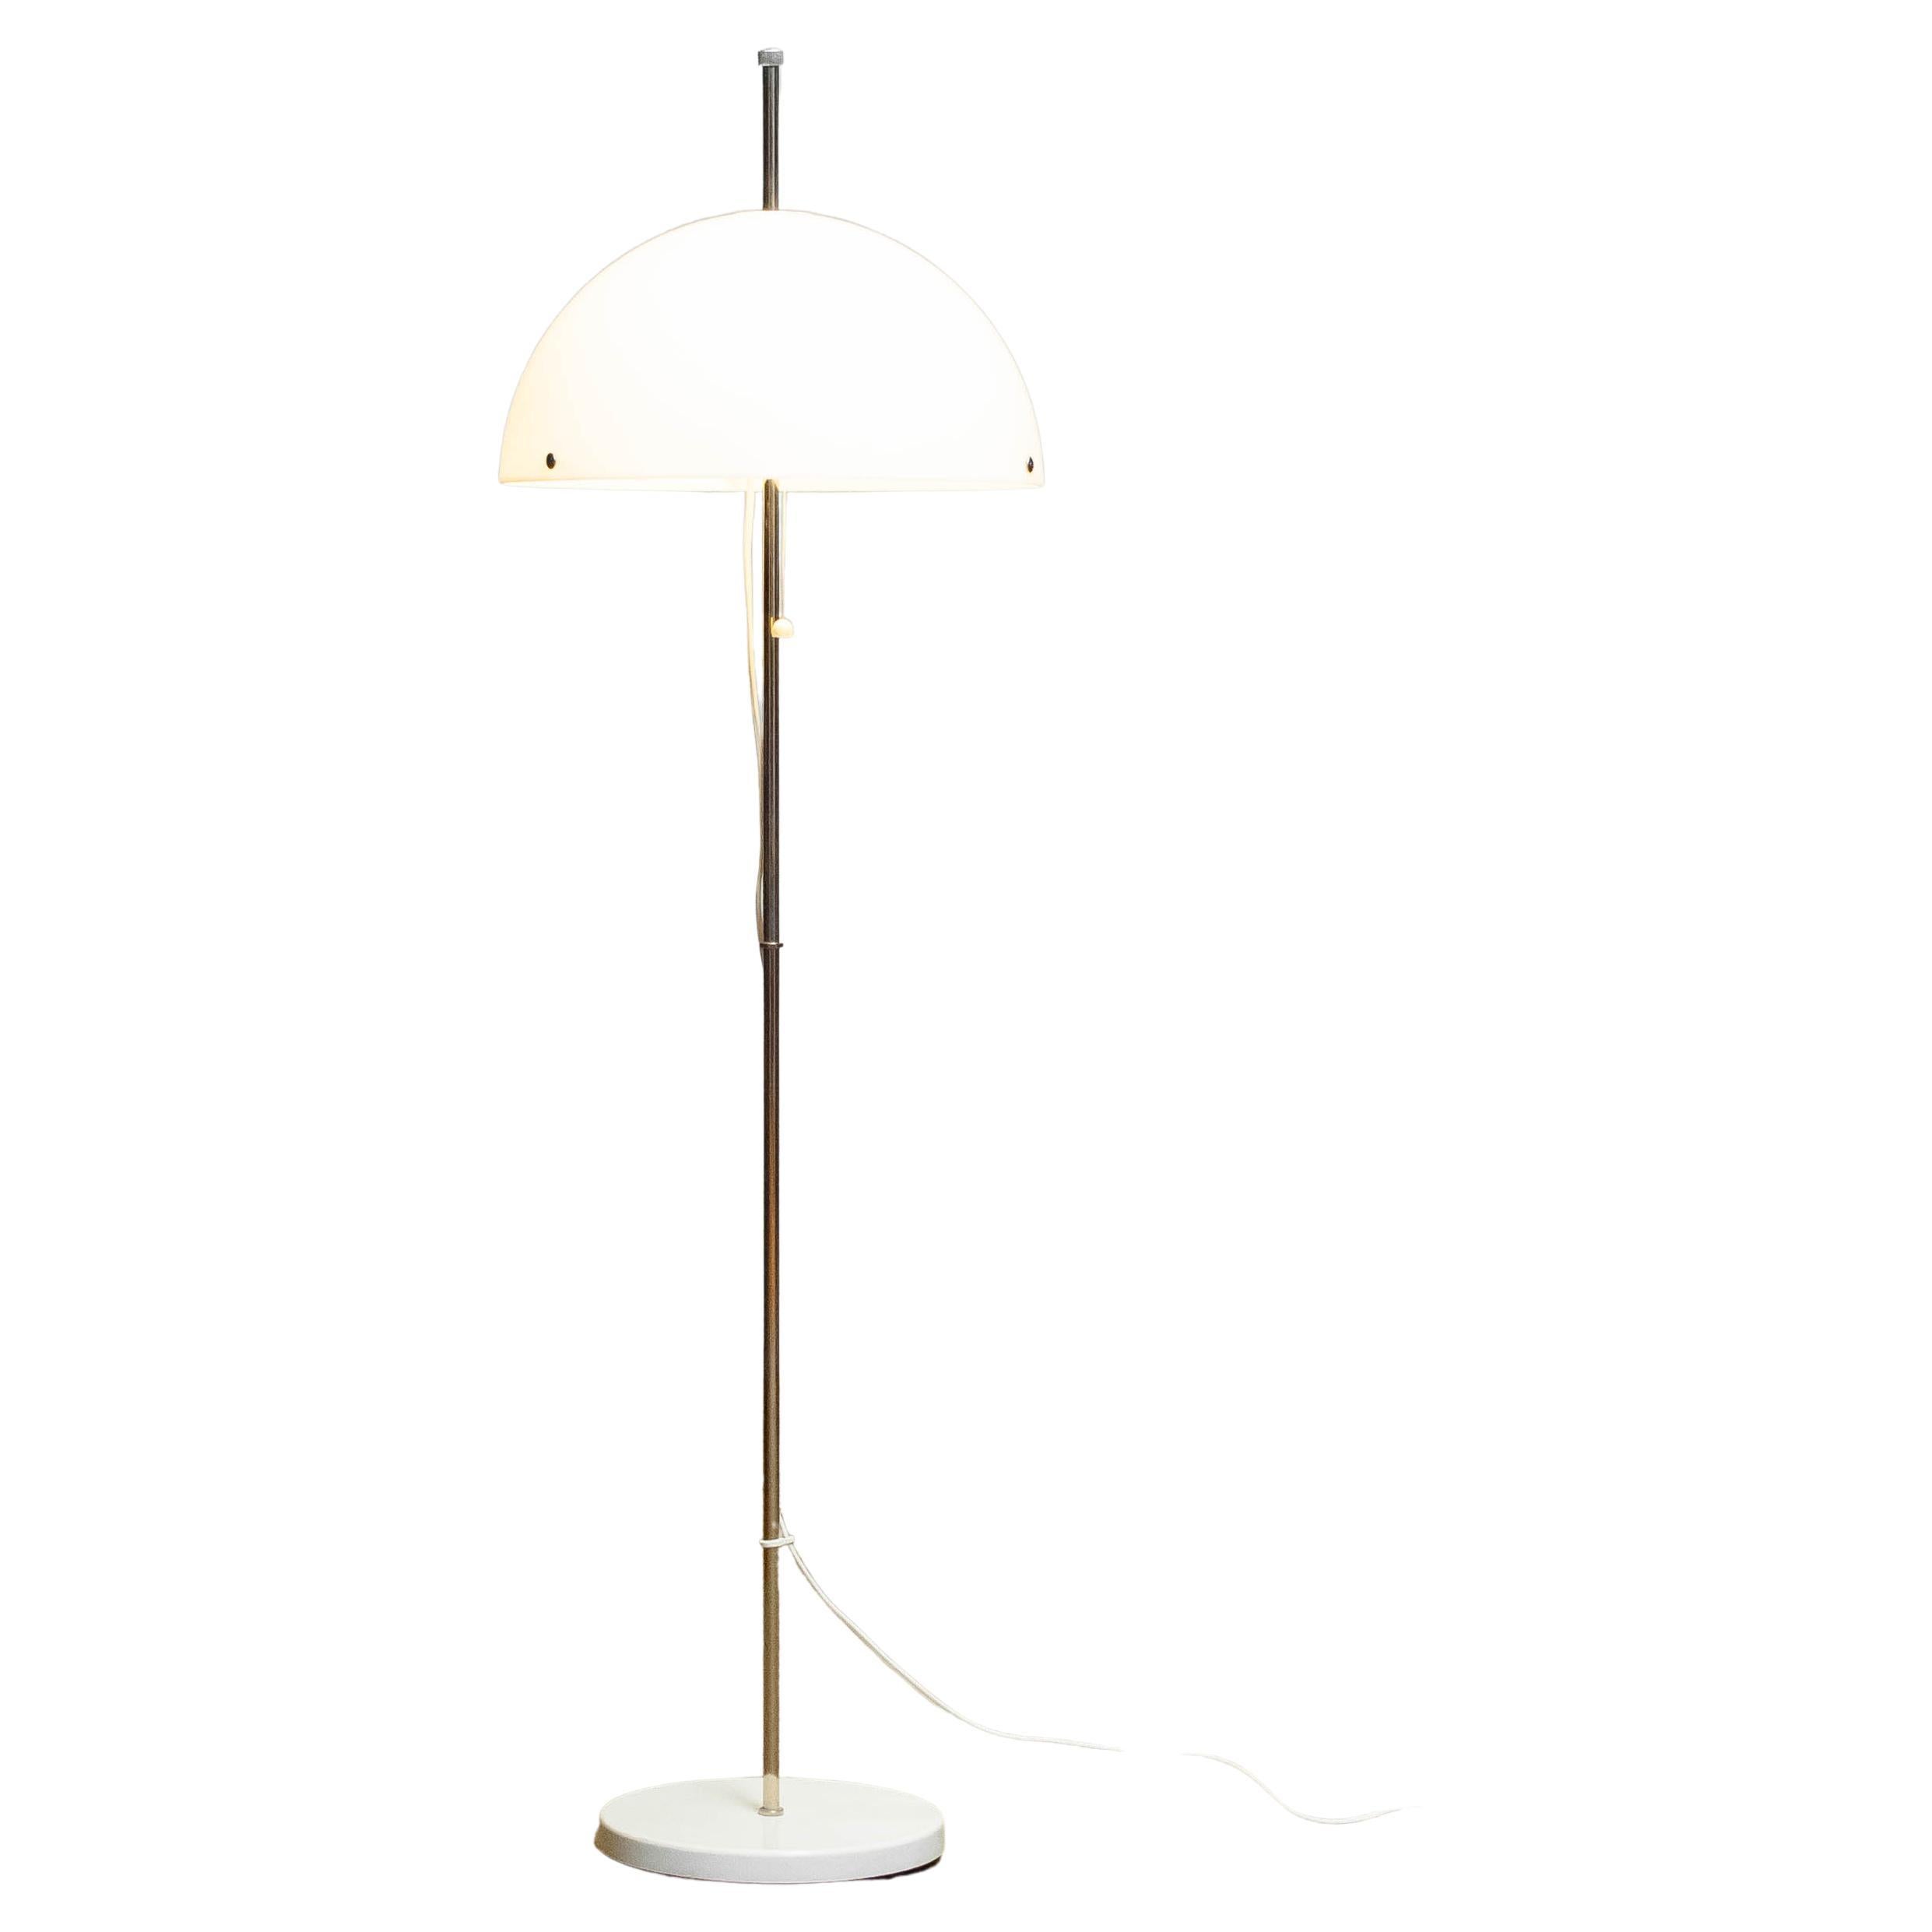 Mushroom floor lamp made by Fagerhult in Belysning Sweden in the 1970's. The chrome stand can be split into half and therefor also used as a table lamp. The acrylic shade is in allover good condition. Consists two E28 screw fittings which can be